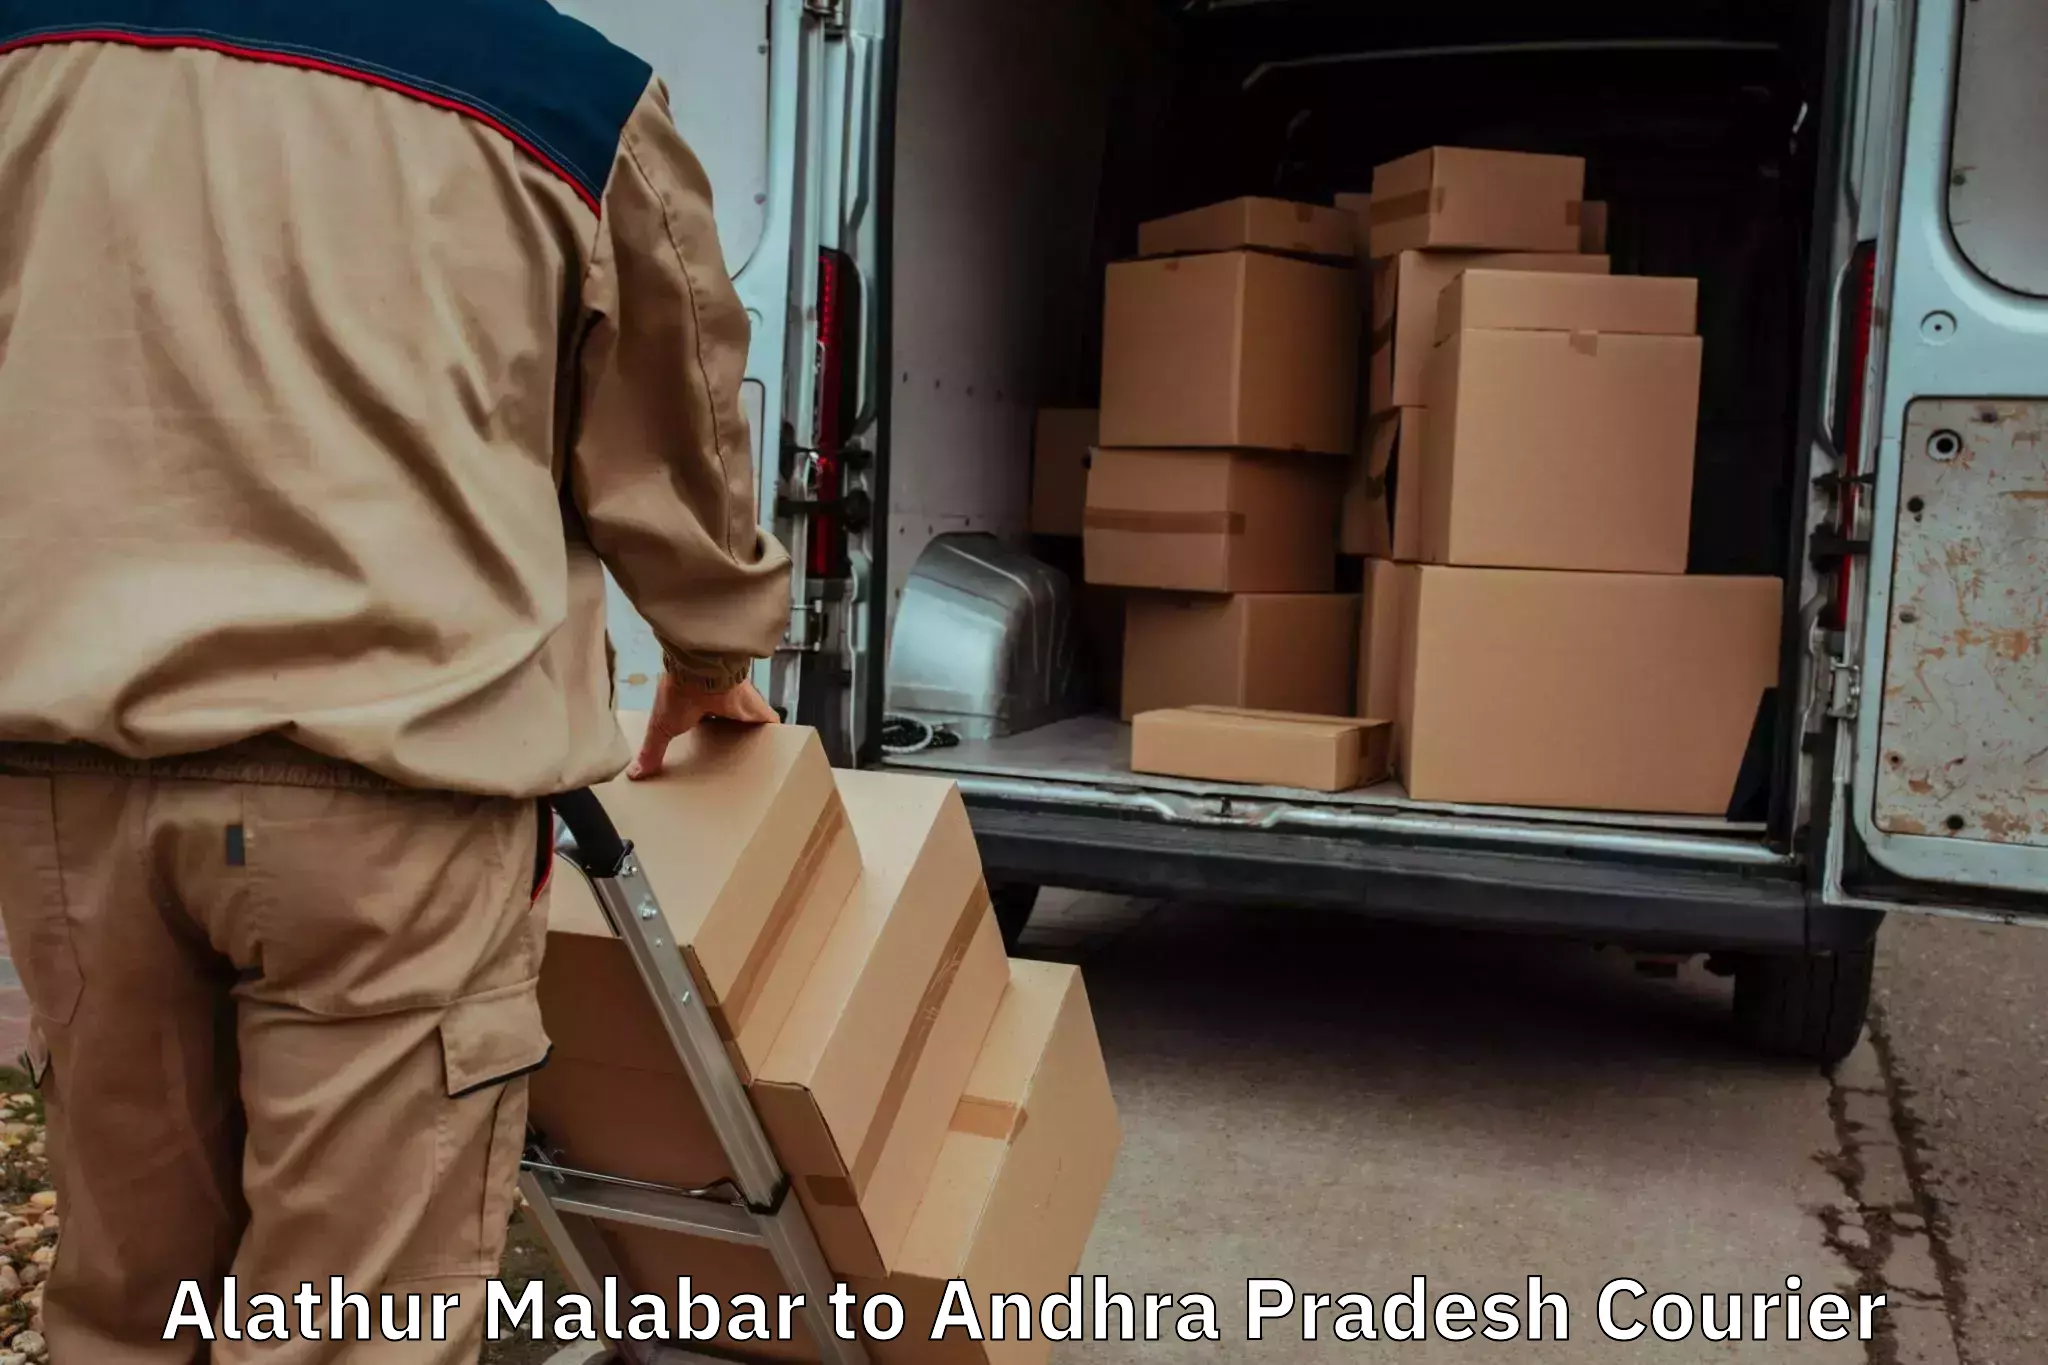 Reliable relocation services Alathur Malabar to Nellore